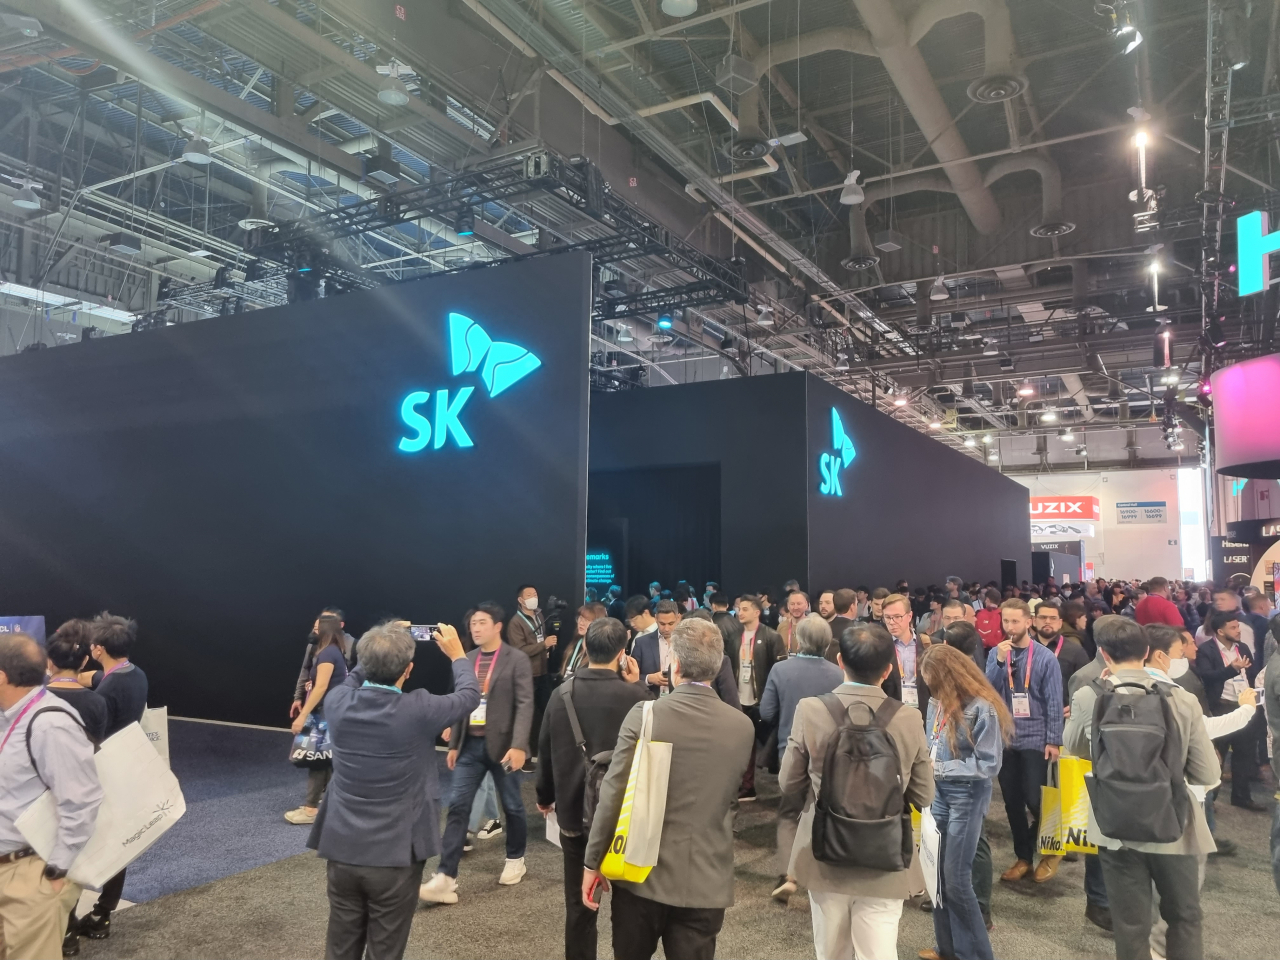 SK's exhibition booth at CES 2023 in Las Vegas (Kan Hyeong-woo/The Korea Herald)